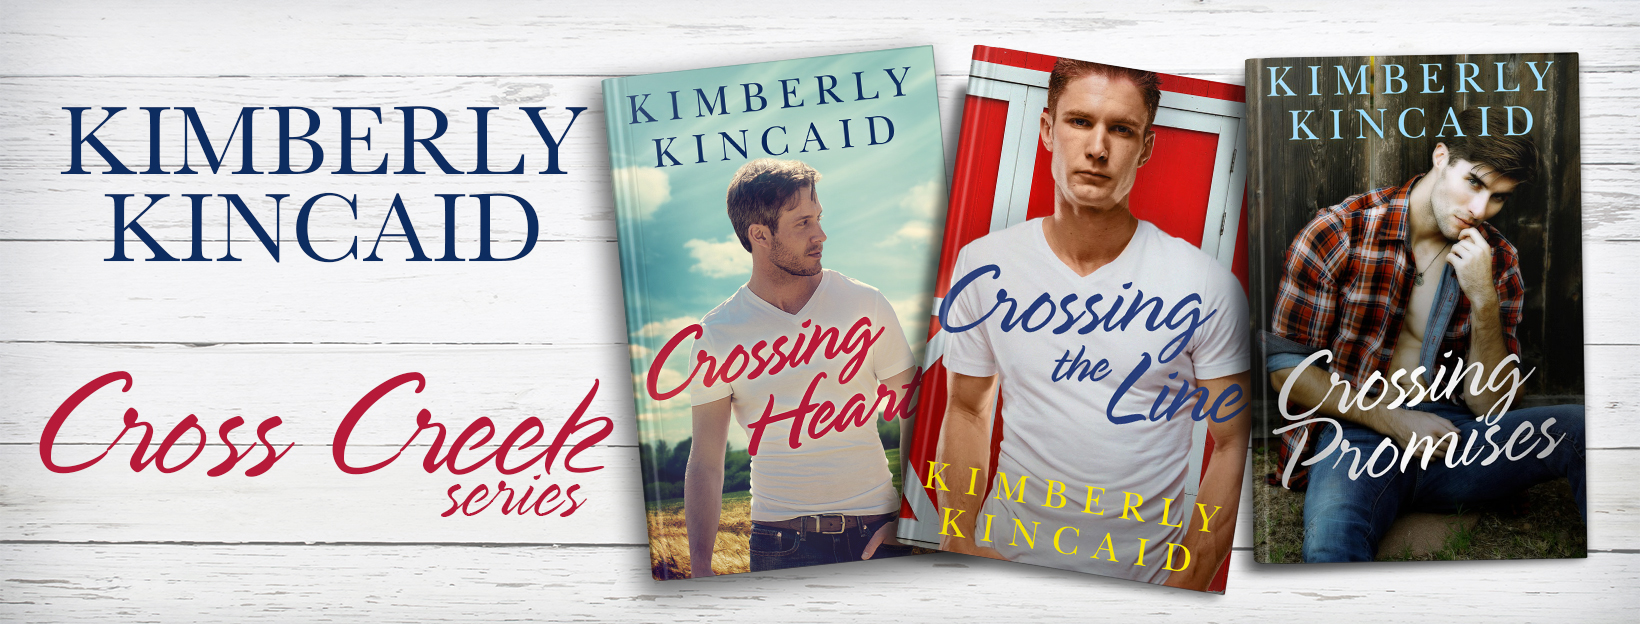 BOOK REVIEW - Crossing Hearts (Cross Creek #1) by Kimberly Kincaid